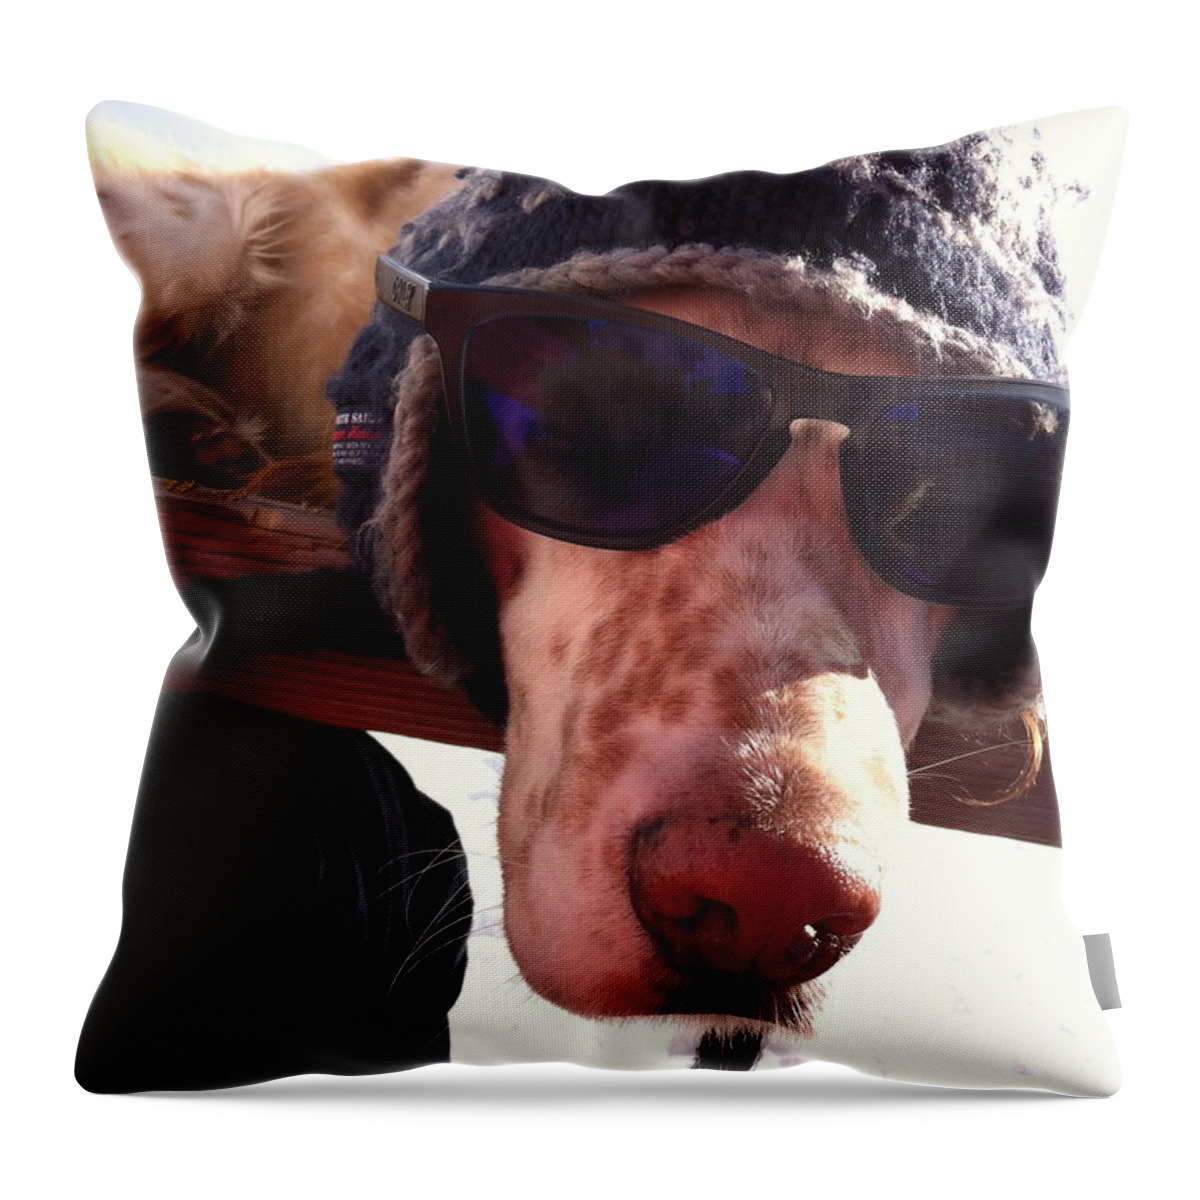 Hummer Throw Pillow featuring the photograph Winter Cool by Hummer Marcoaldi